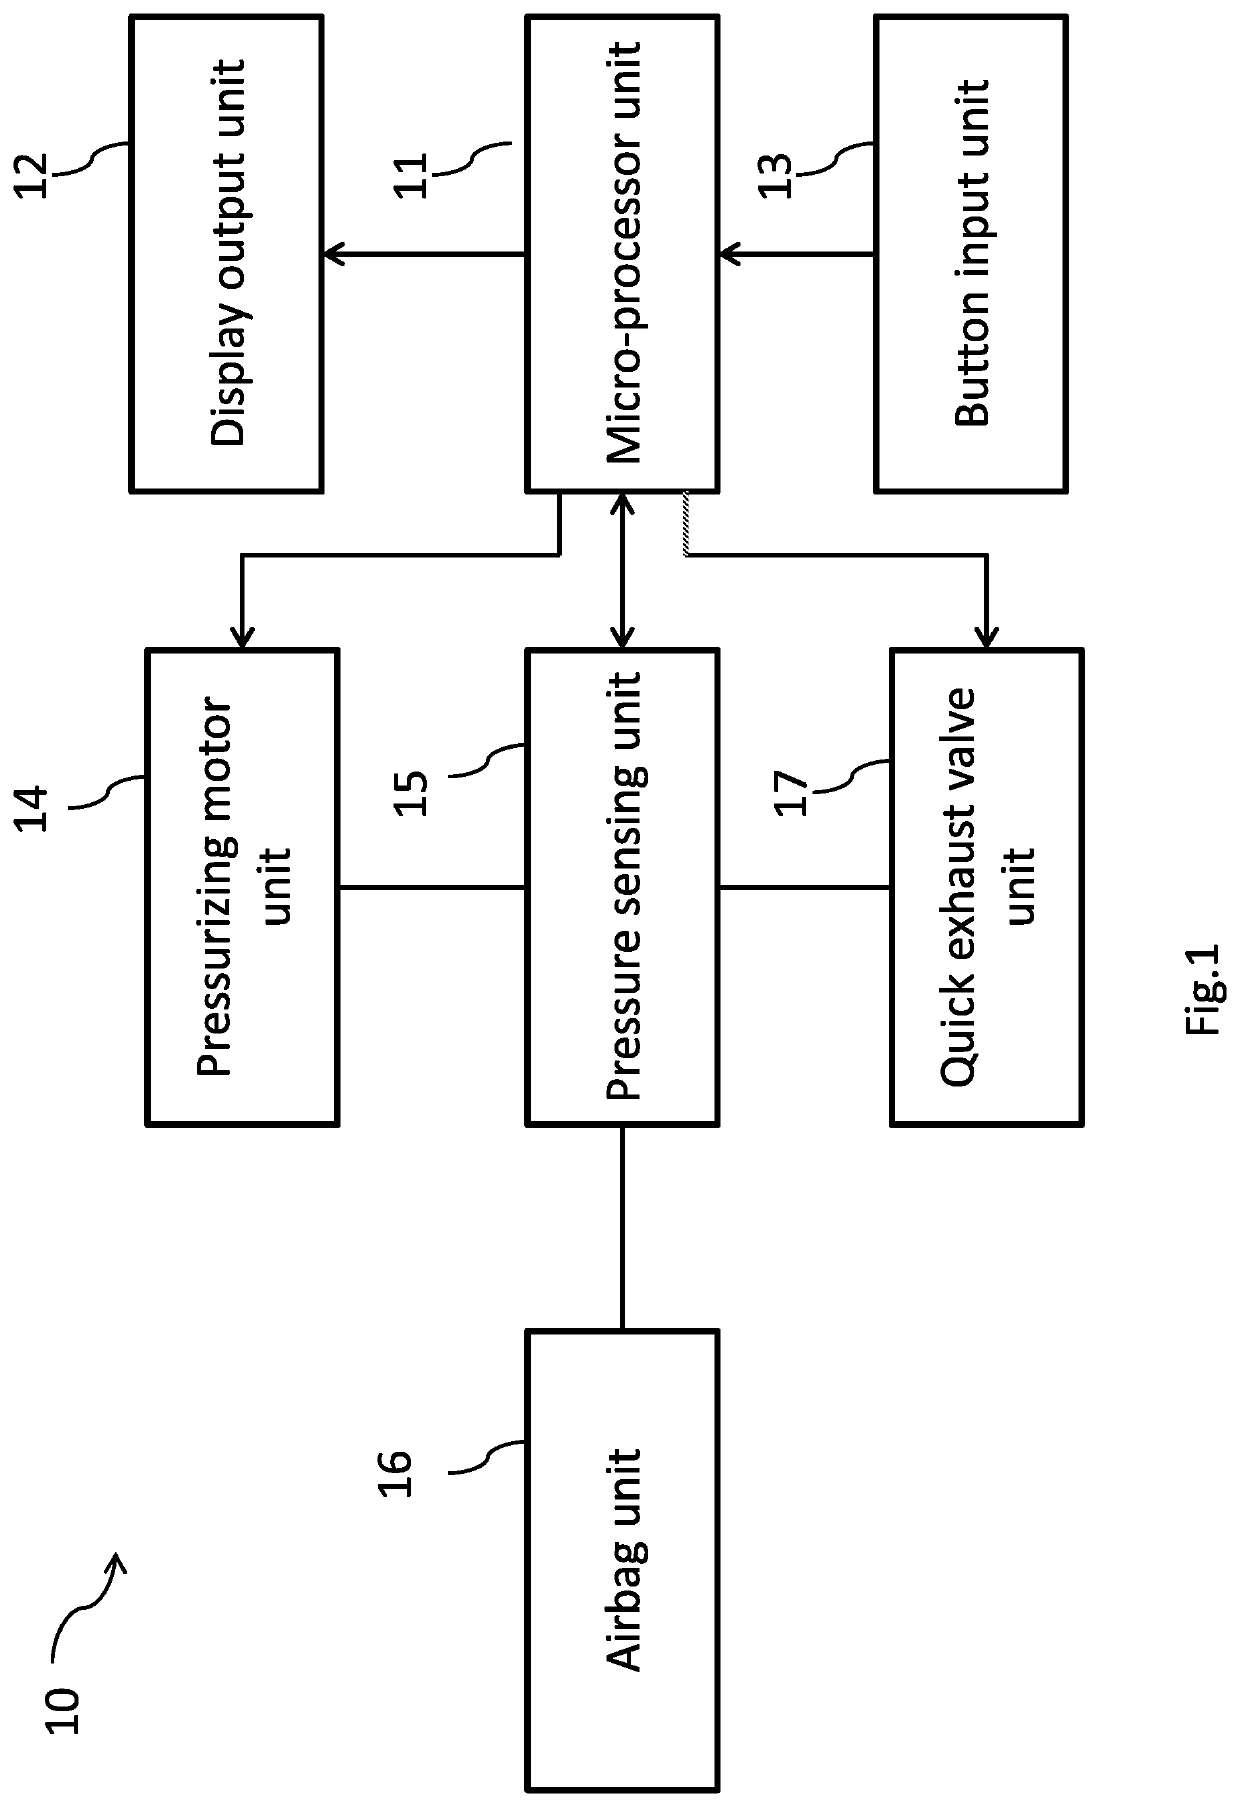 Measurement device and method for measuring psychology stress index and blood pressure